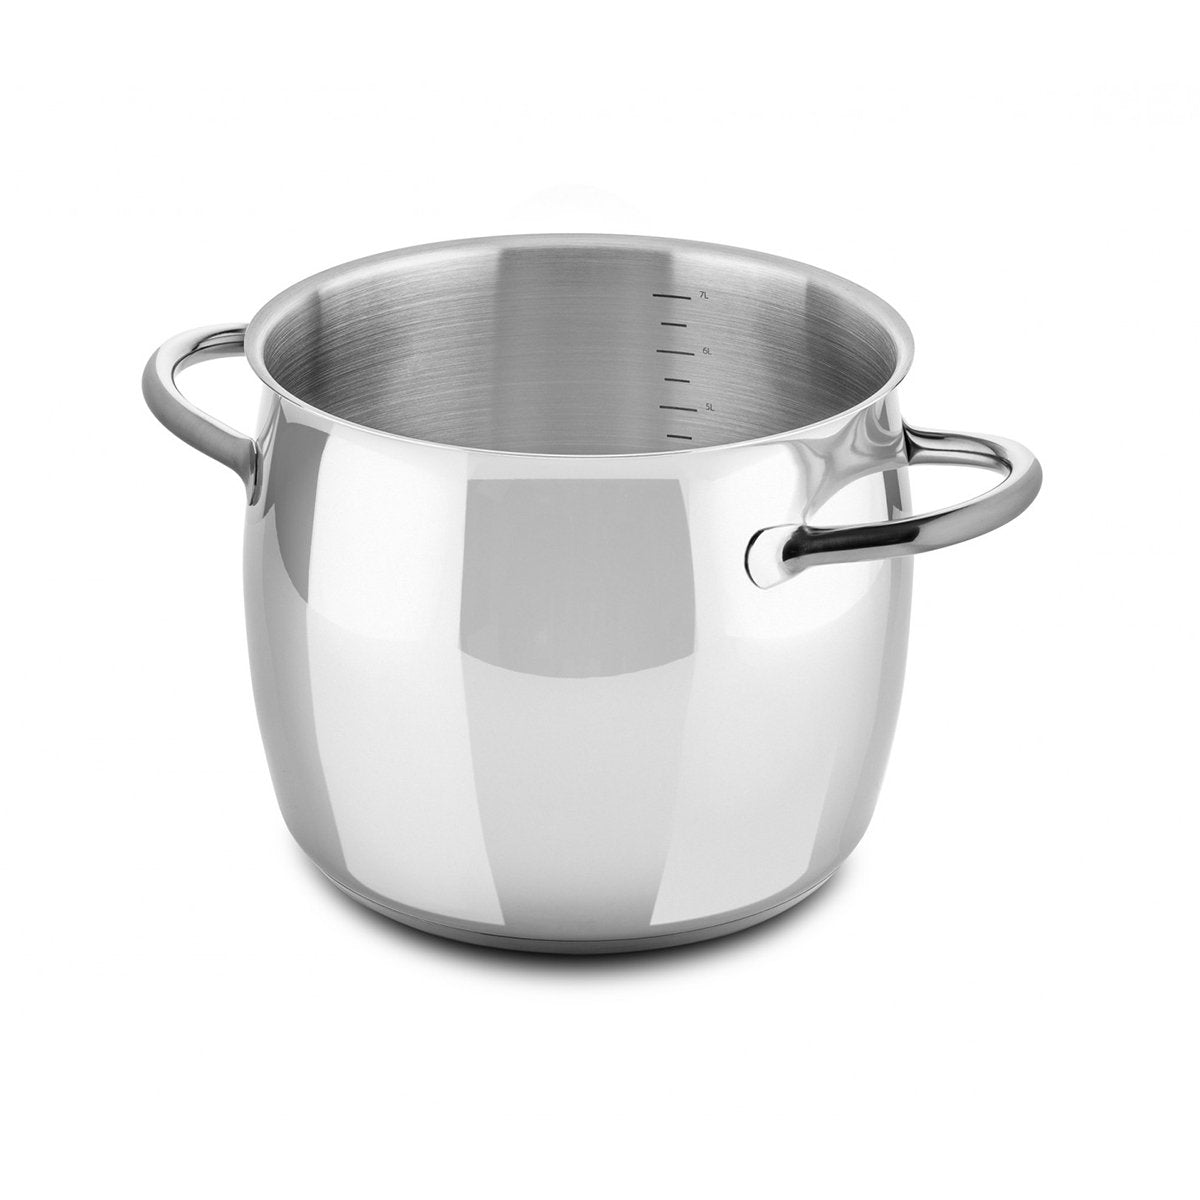 Pasta pan 22 cm 1950 Stainless Steel - 1950 - Cookware